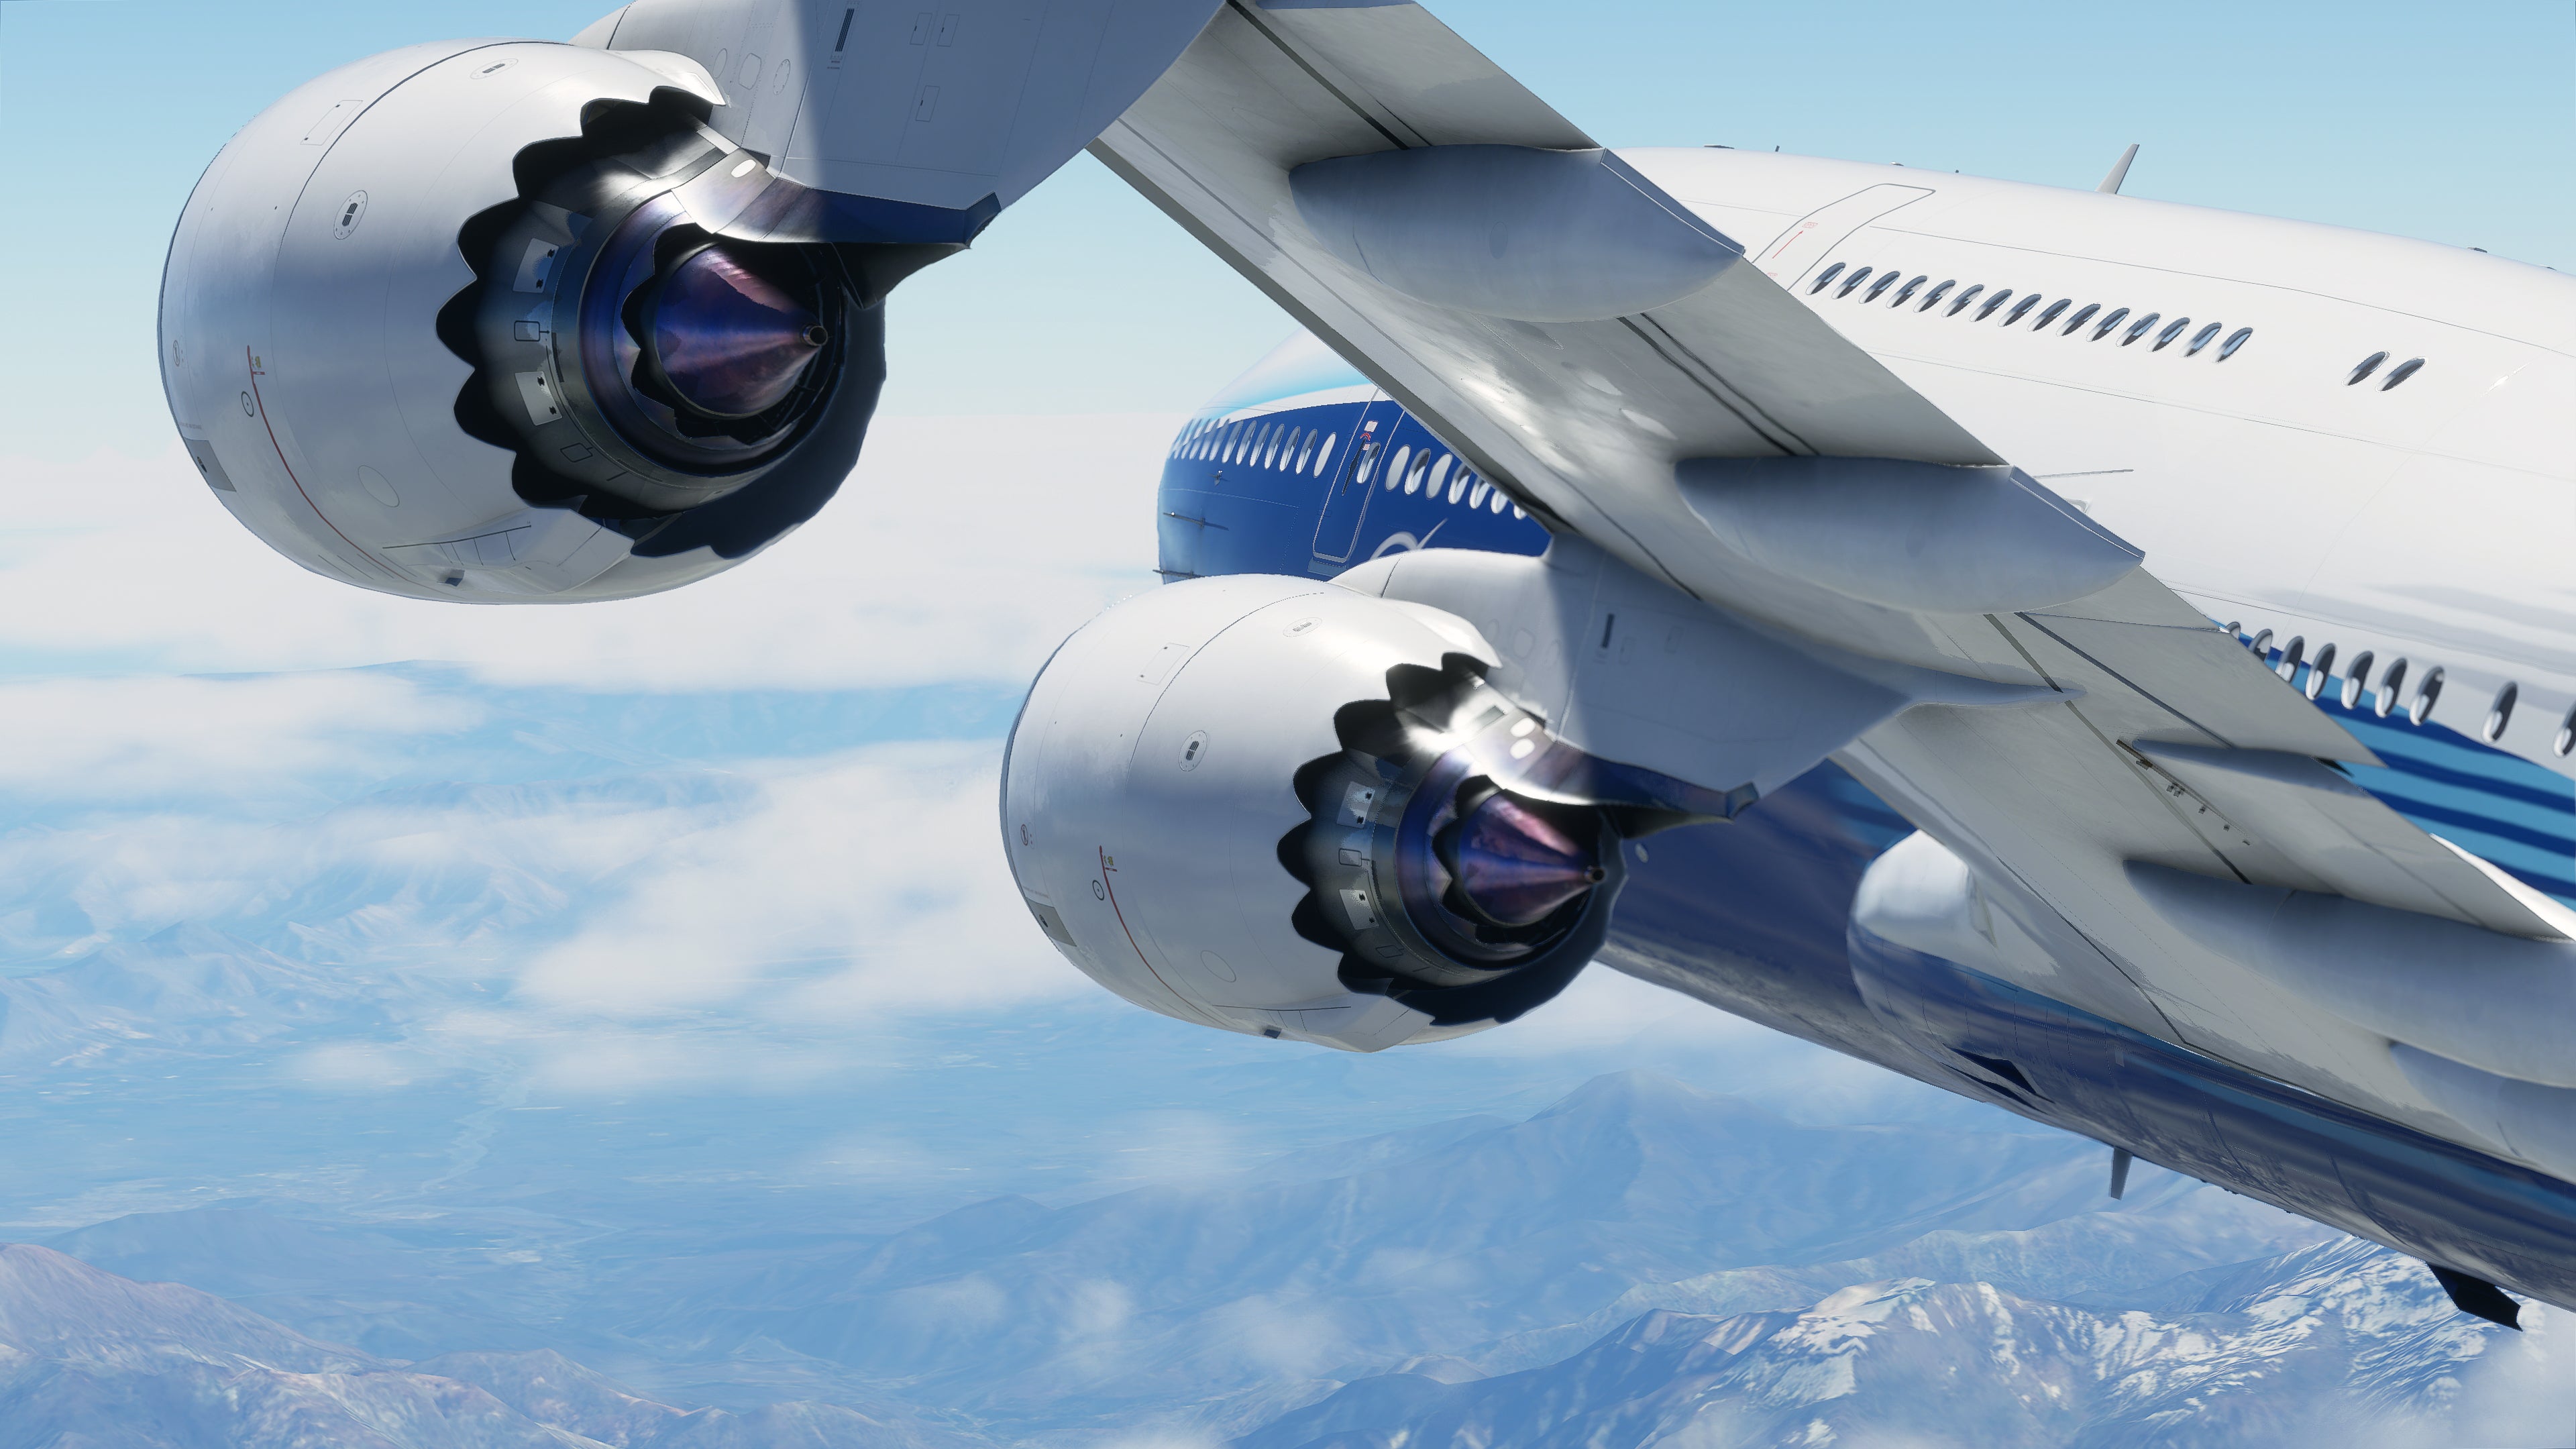 Microsoft Flight Simulator takes off August 18 in three editions for PC